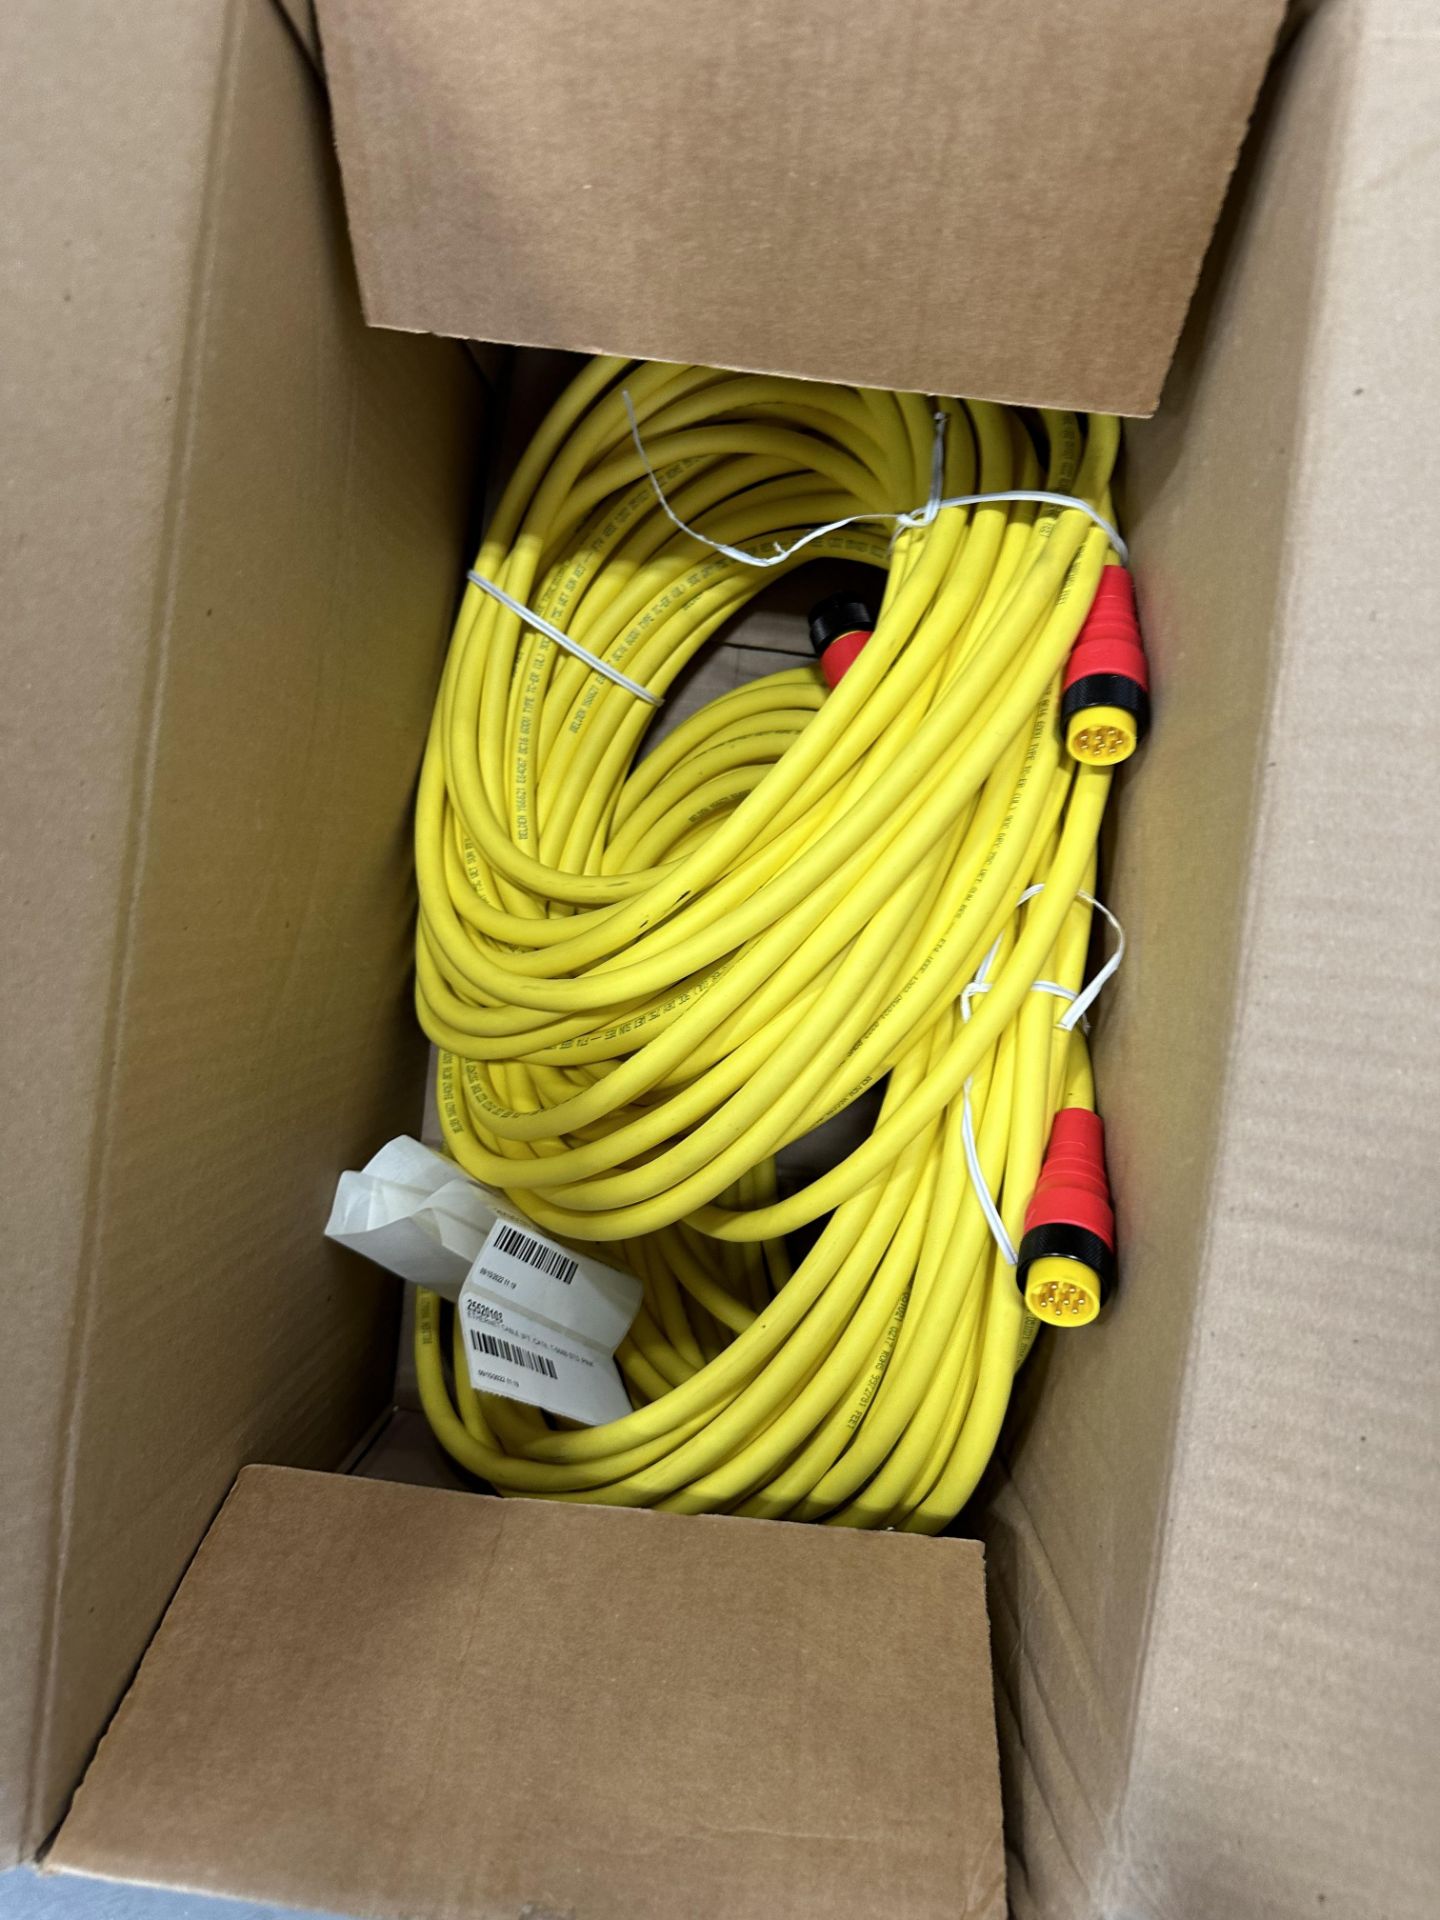 New Panduit 3ft Ethernet Cable and Turck 8P Male Cable - Image 8 of 8